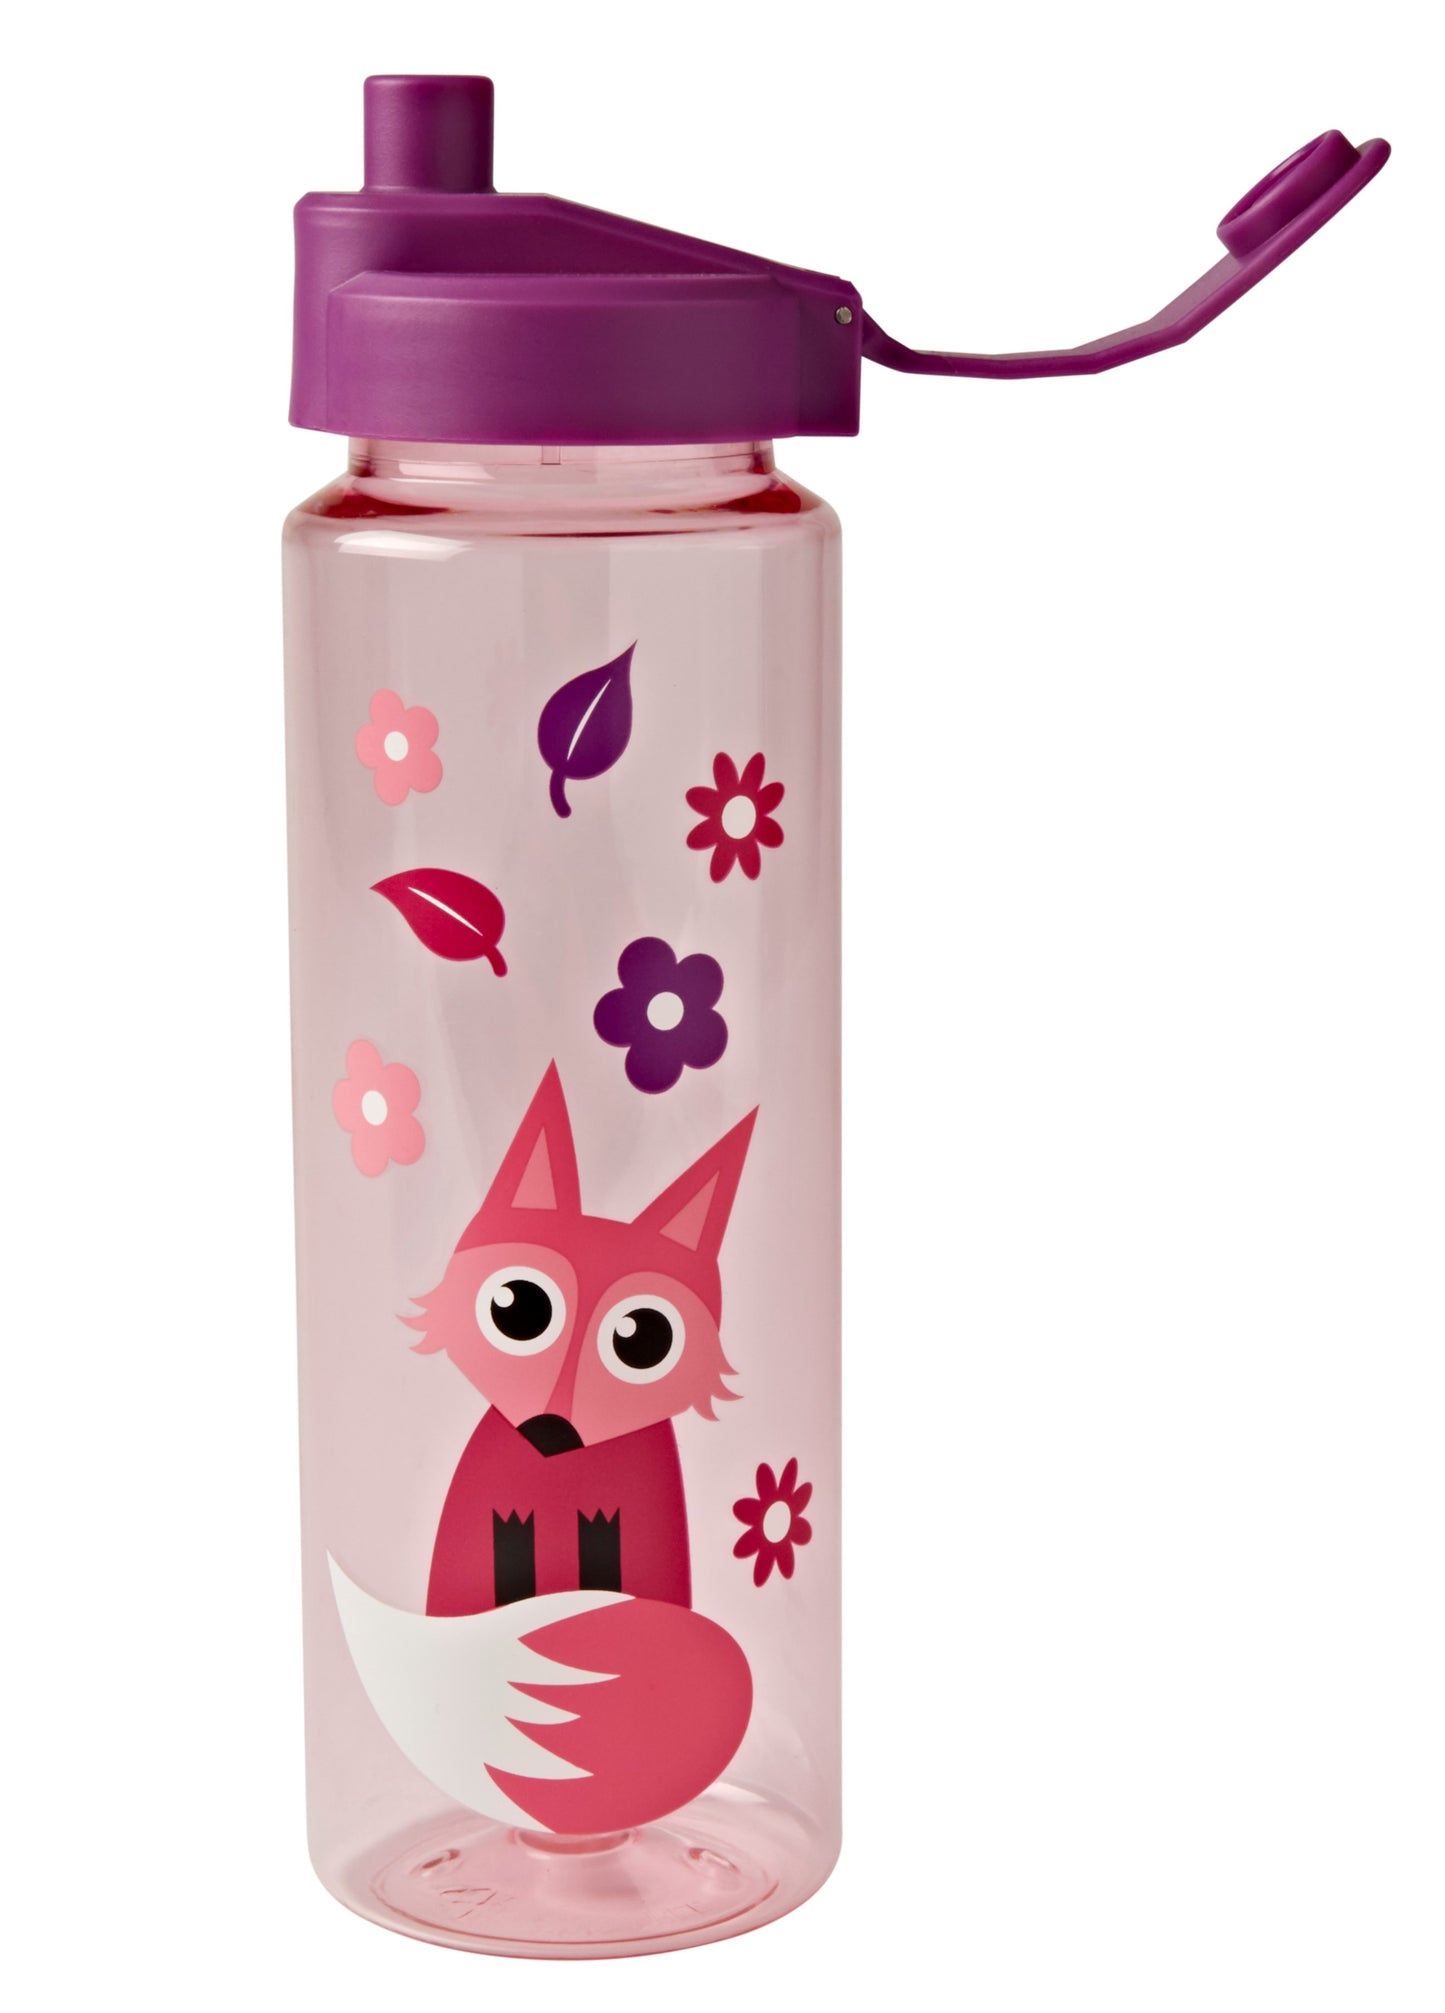 Tinc water bottle in pink and purple woodland animals design